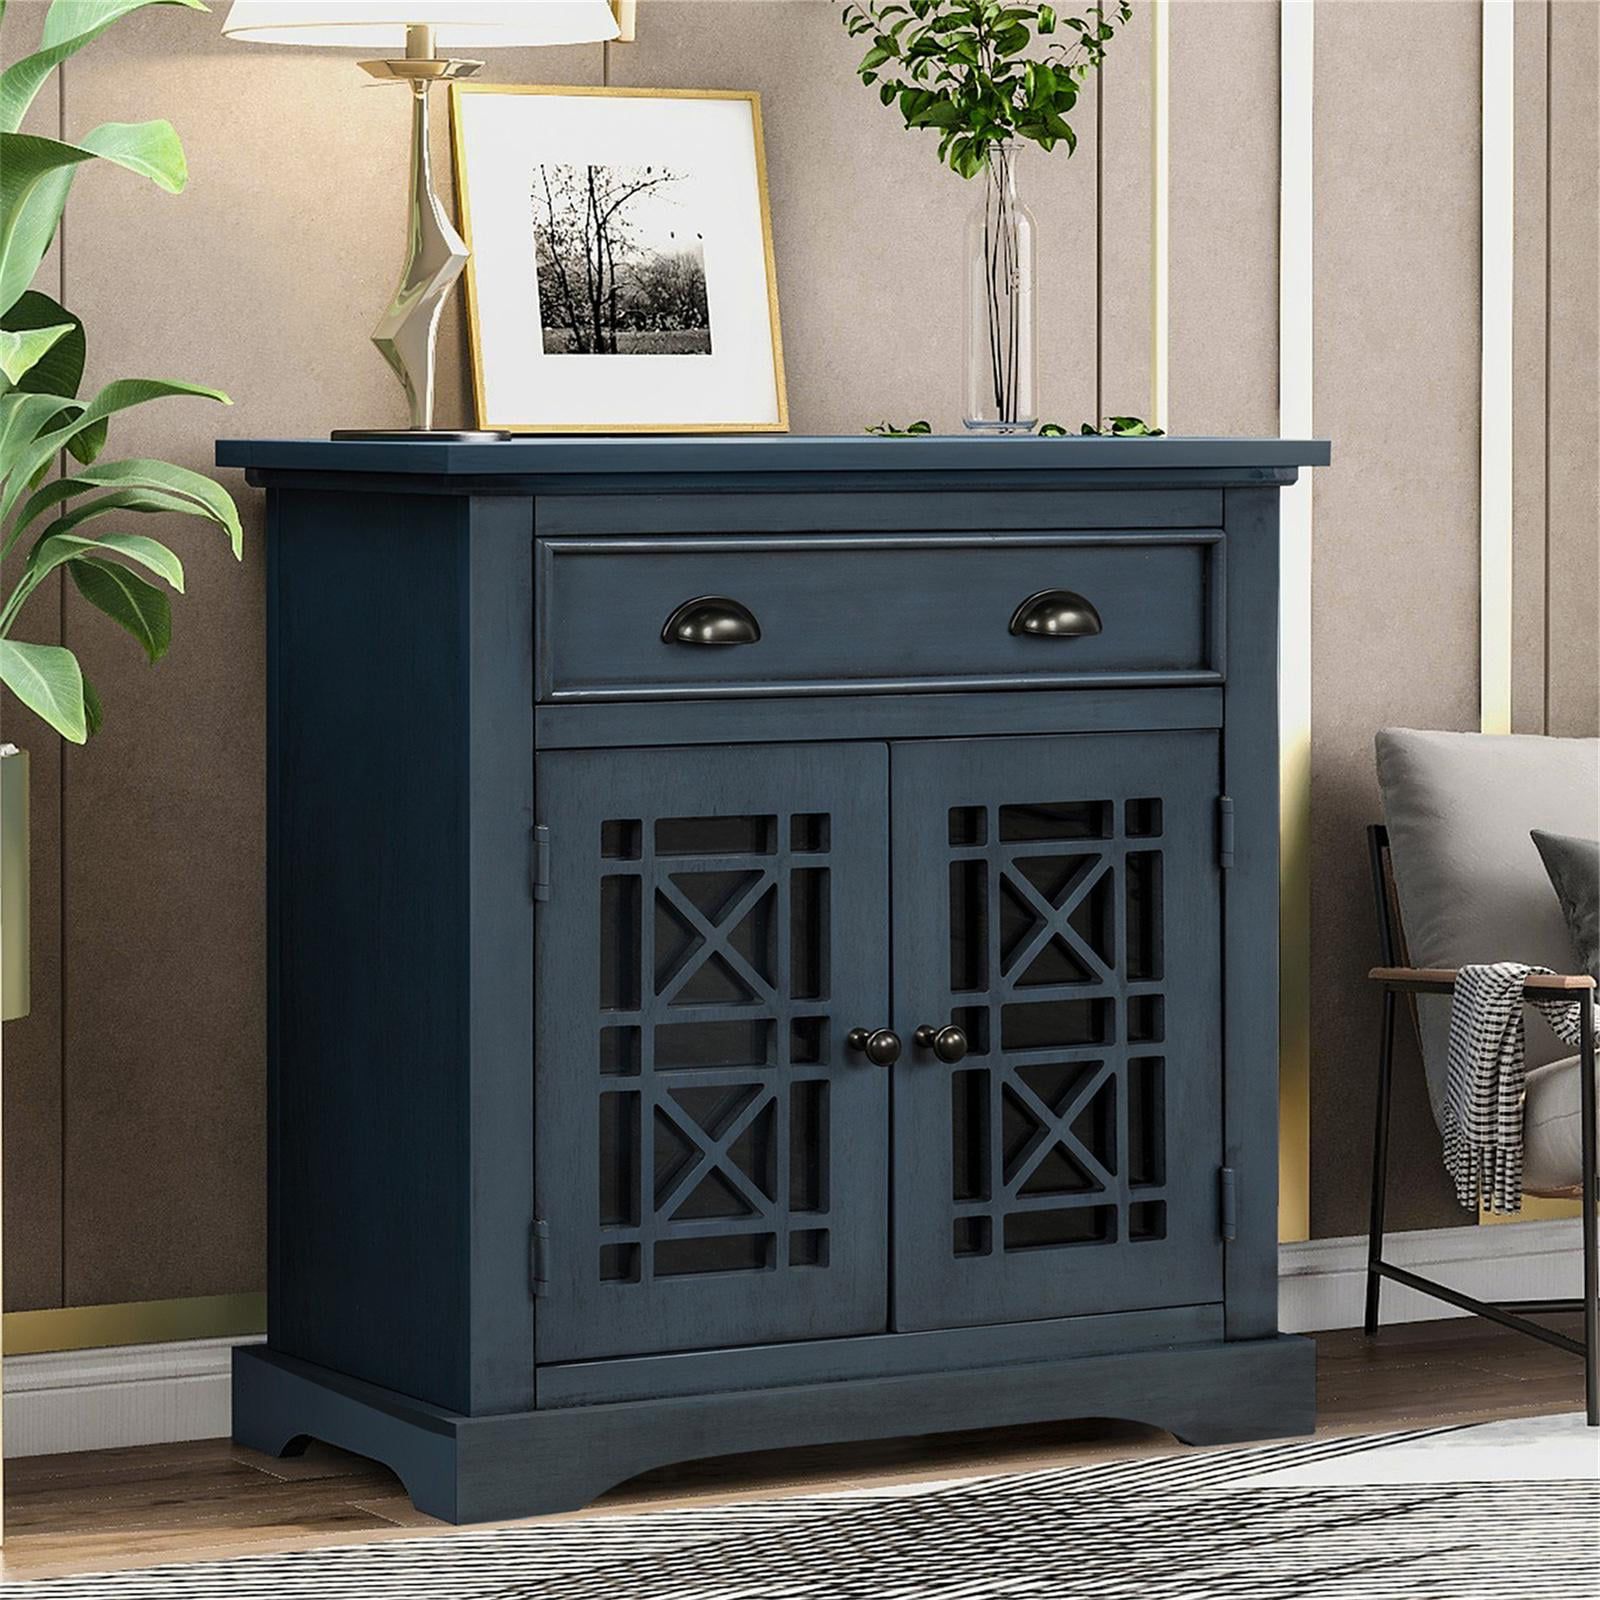 Rectangular Storage Cabinet, Console Sofa Table Wih Cabinet And Big In 2019 Freestanding Tables With Drawers (View 3 of 15)